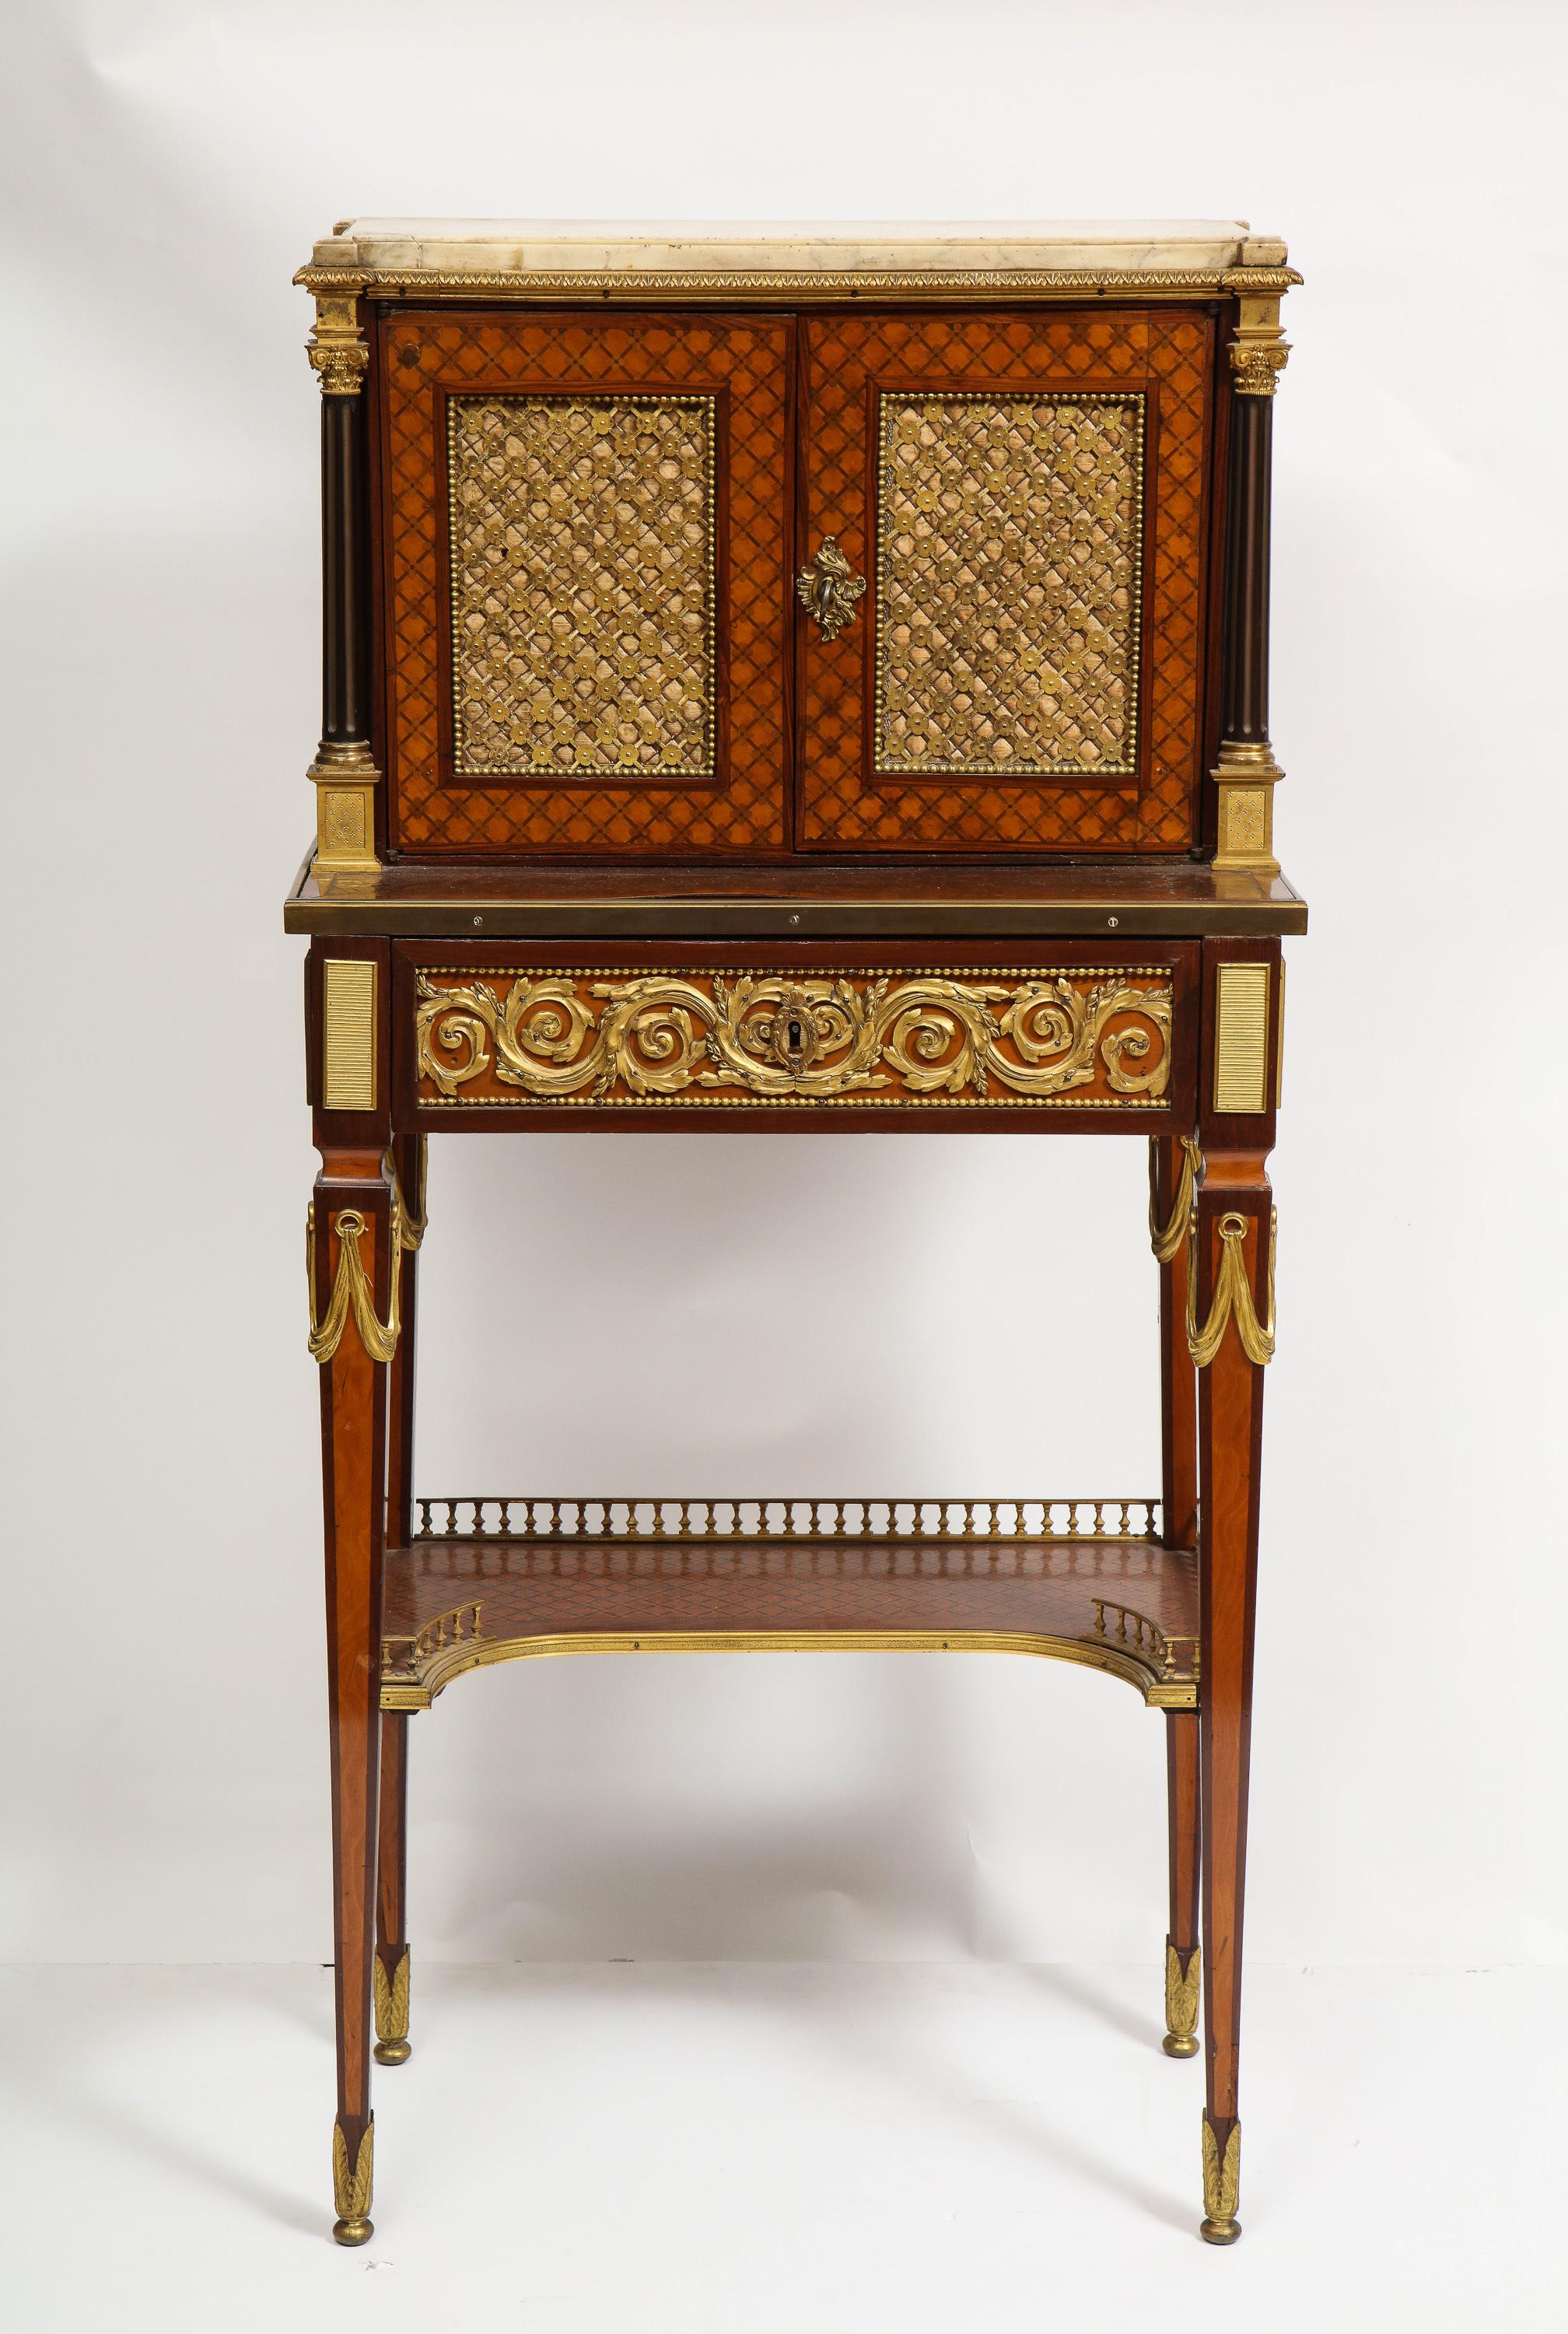 A French Ormolu Mounted mahogany Bonheur Du Jour, attributed to Henry Dasson, circa 1870.

Very fine quality French ormolu mounts throughout, with marble top, two doors revealing two shelves, a sliding drawer and a galley.

Although unsigned,